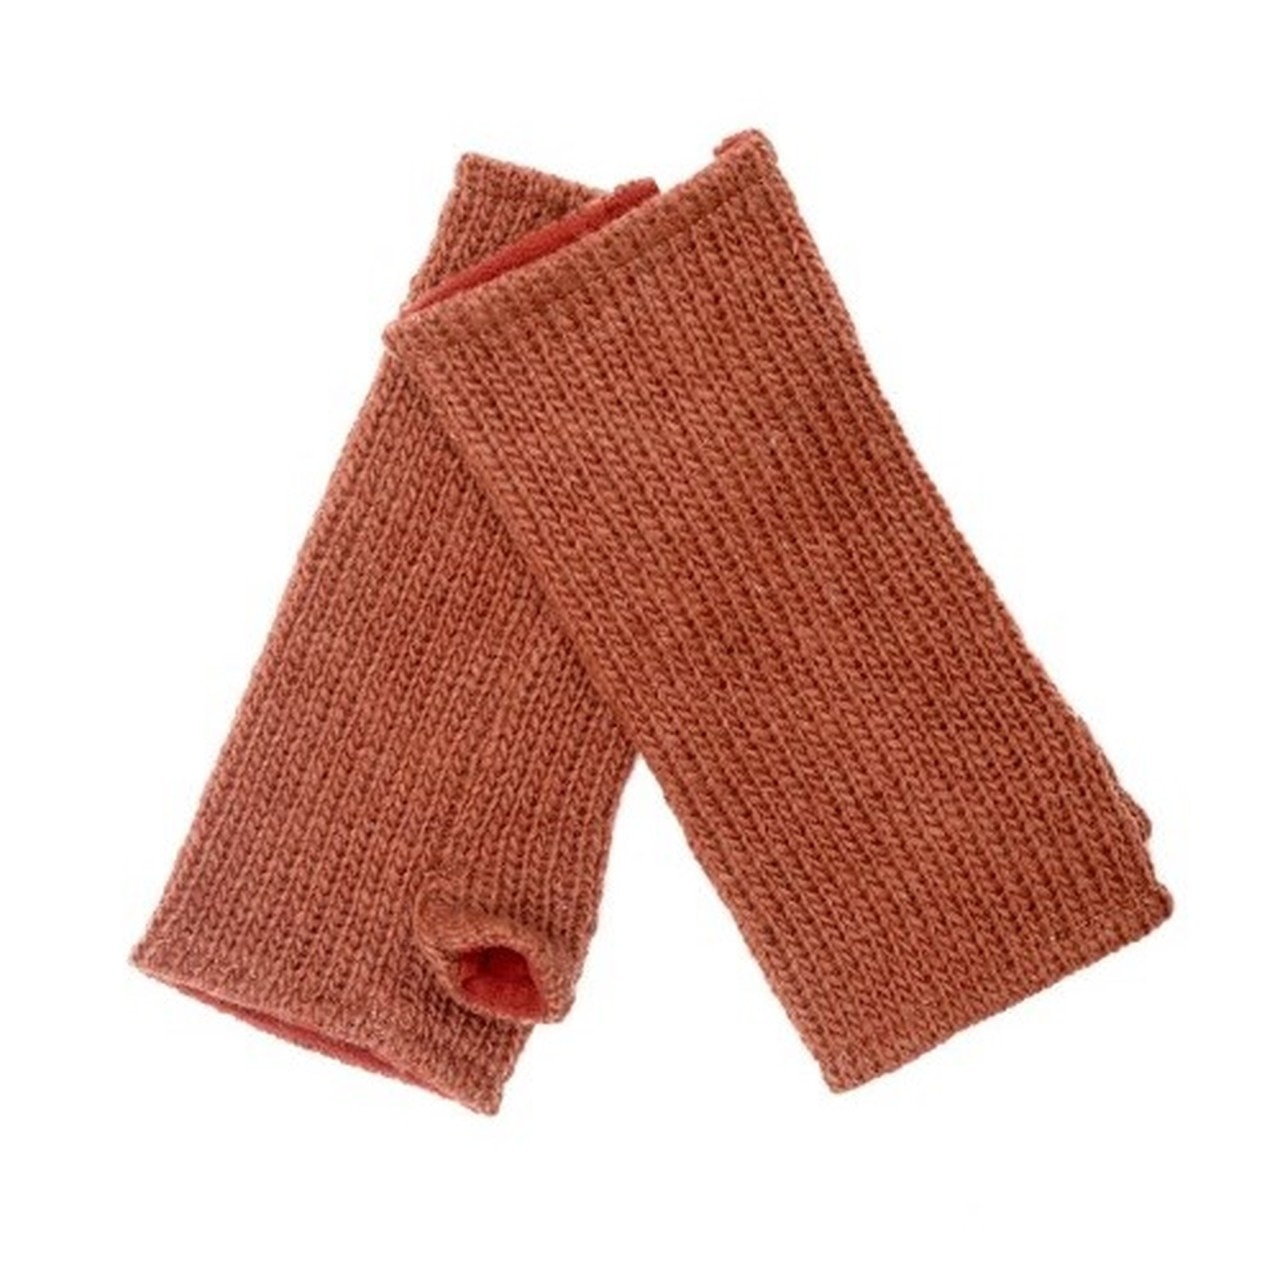 Solid Handwarmers - Accessibility and Warmth. - Exit9 Gift Emporium